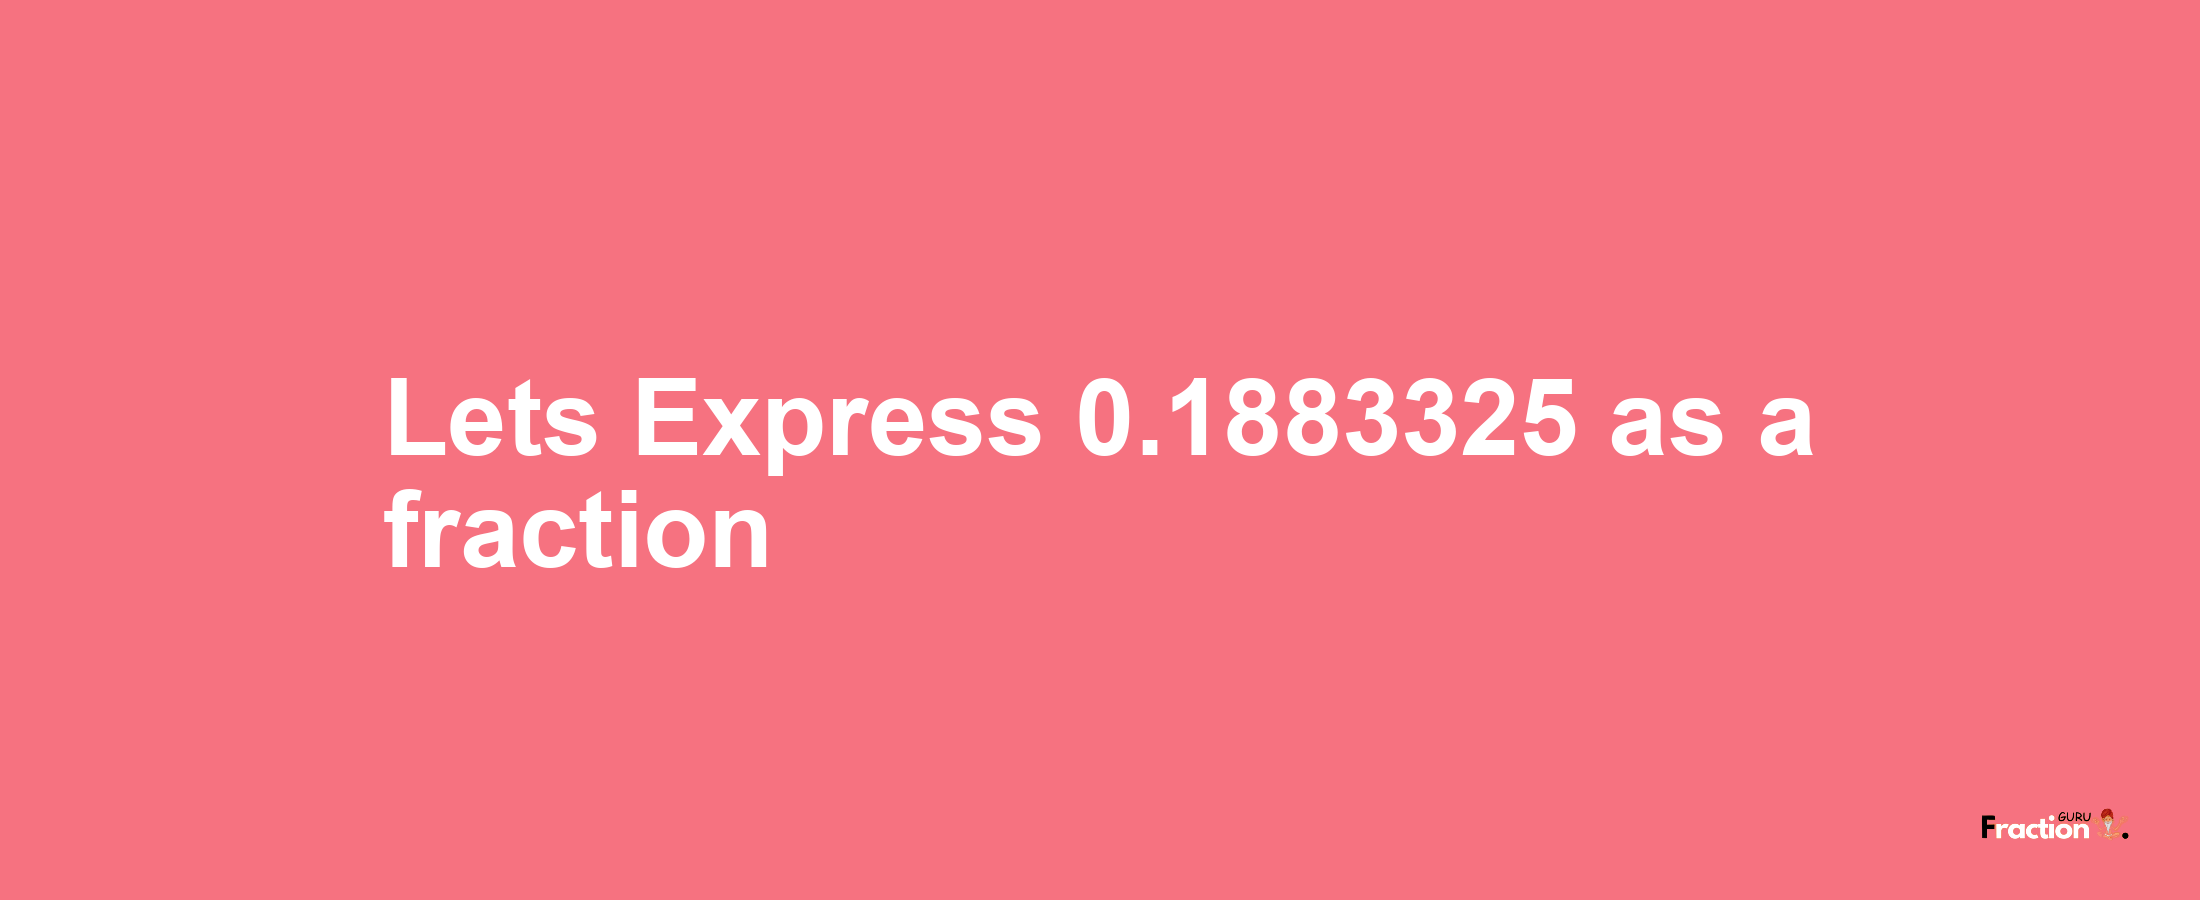 Lets Express 0.1883325 as afraction